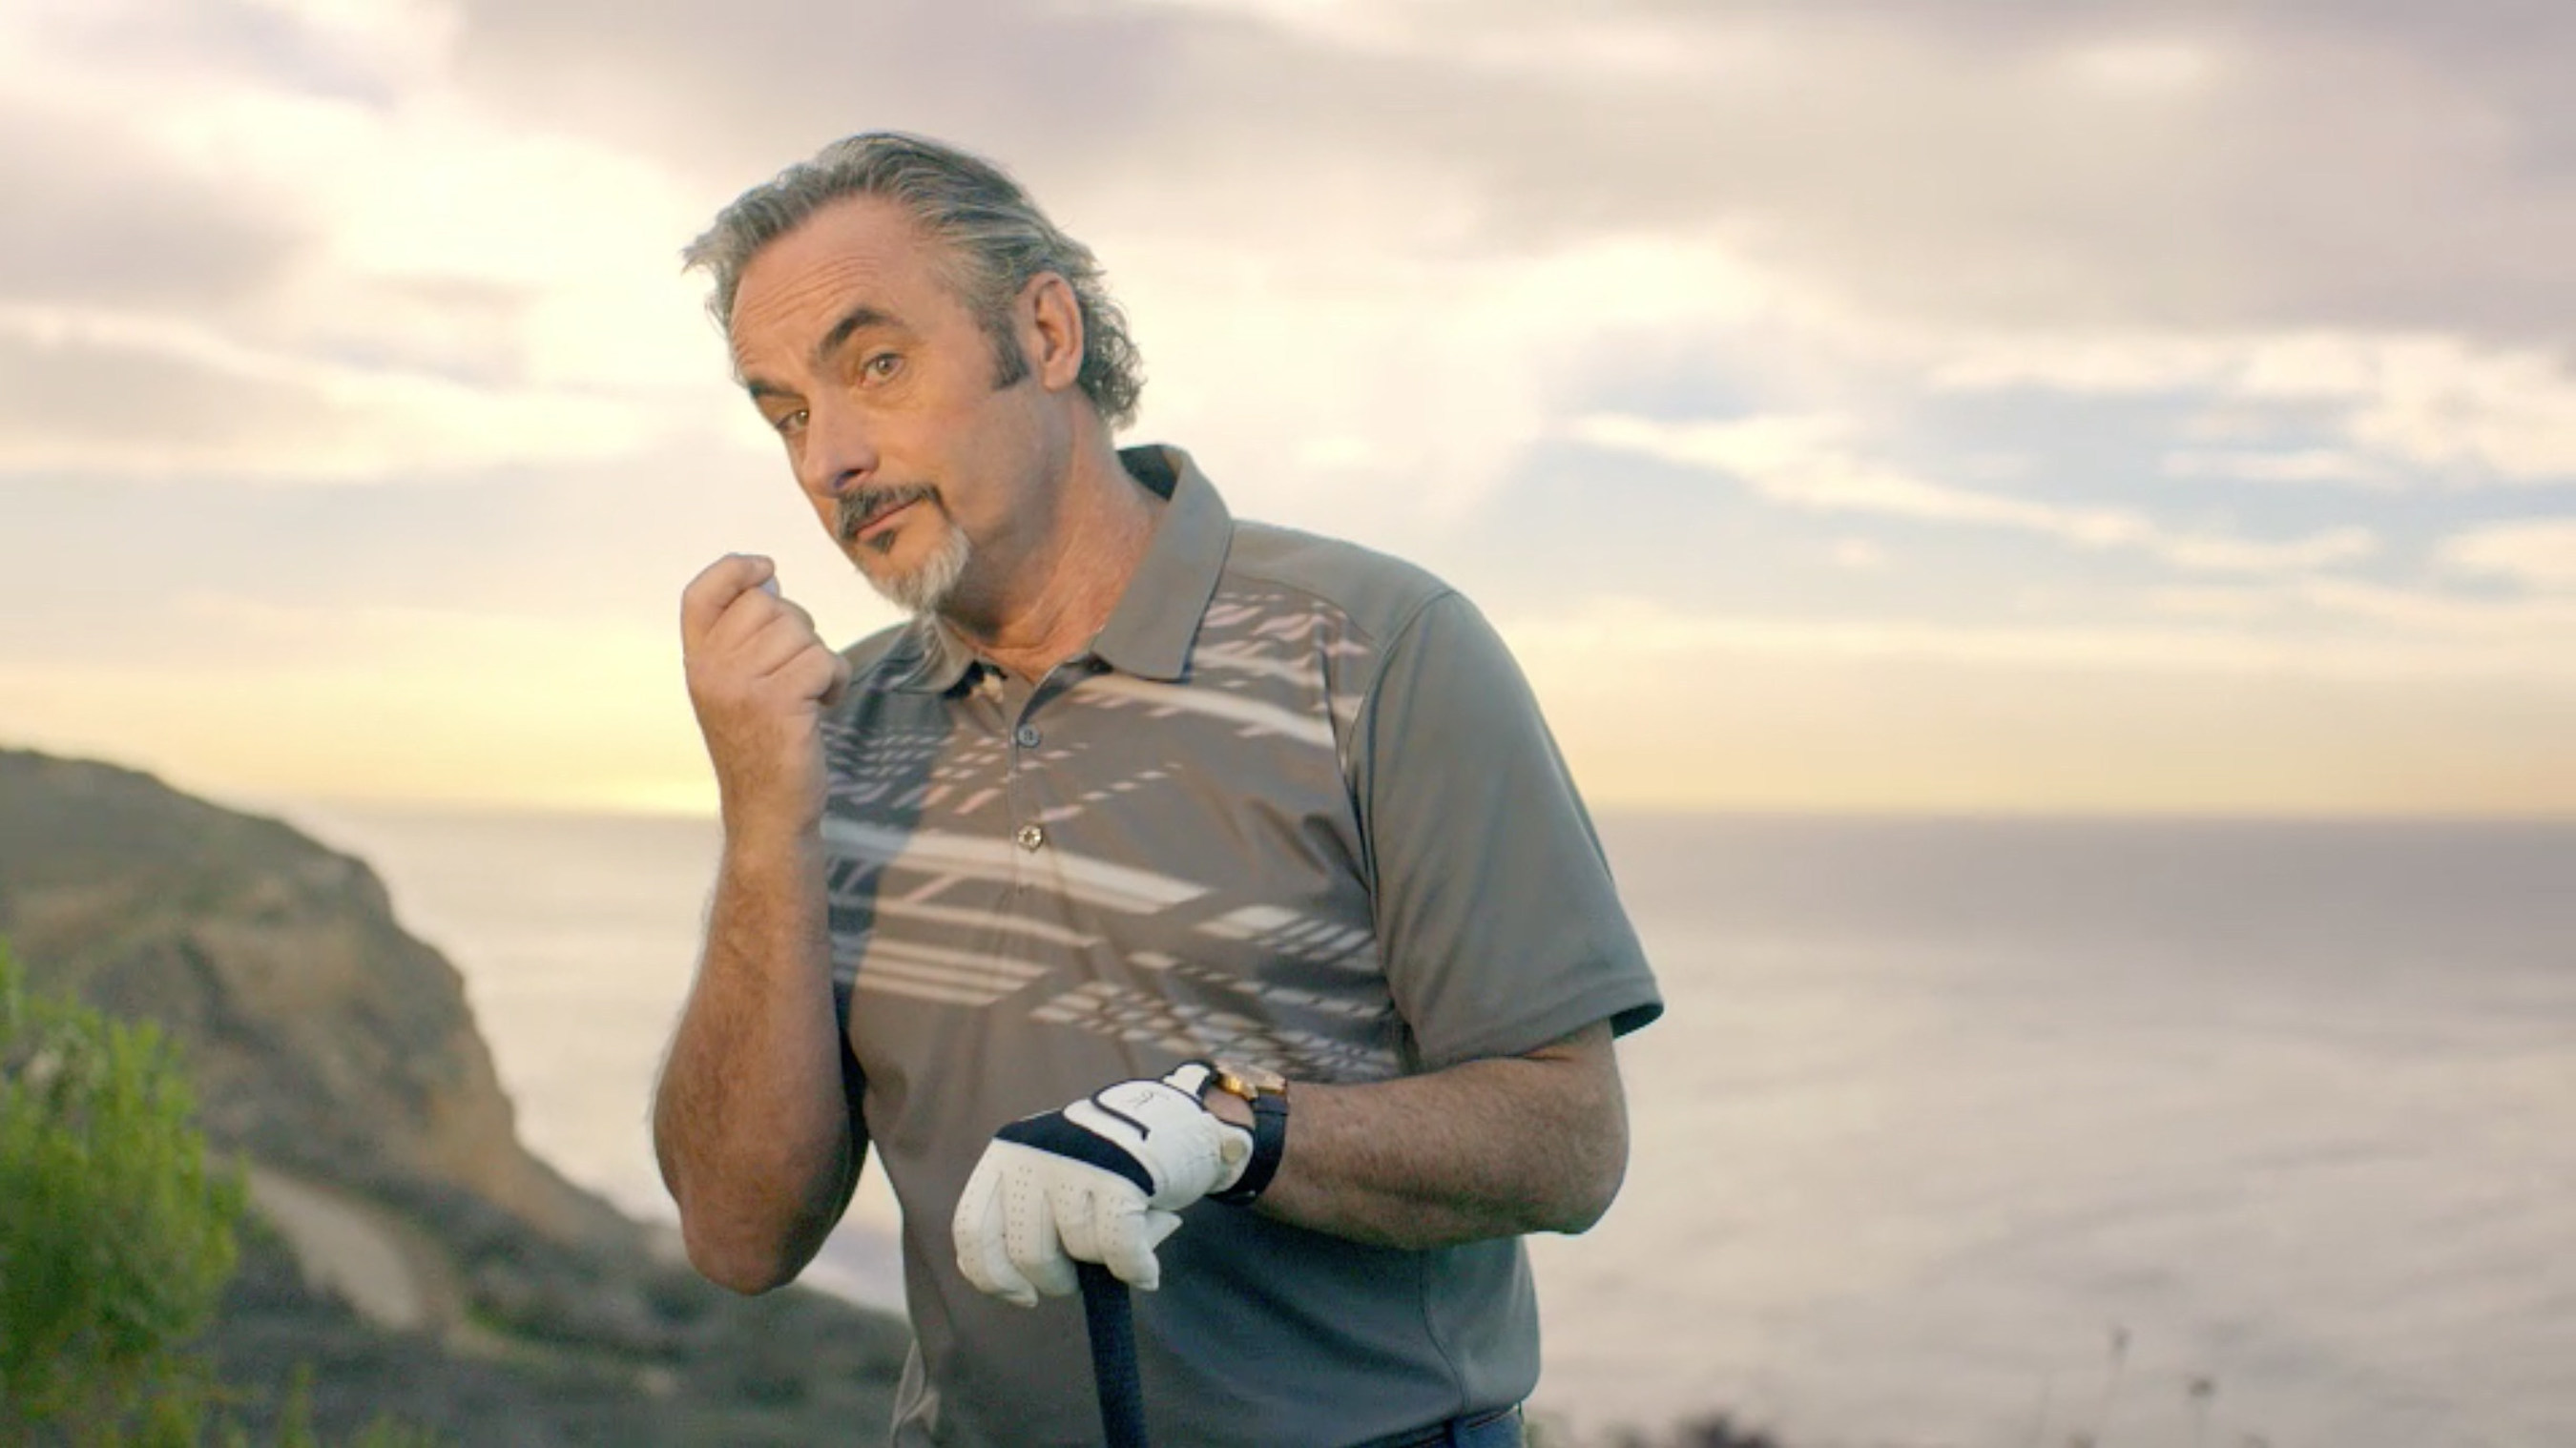 Host of the Feherty Show and CBS golf analyst David Feherty uses his signature wit and colorful personality to provide "driving tips" in Hyundai's new golf advertisements.